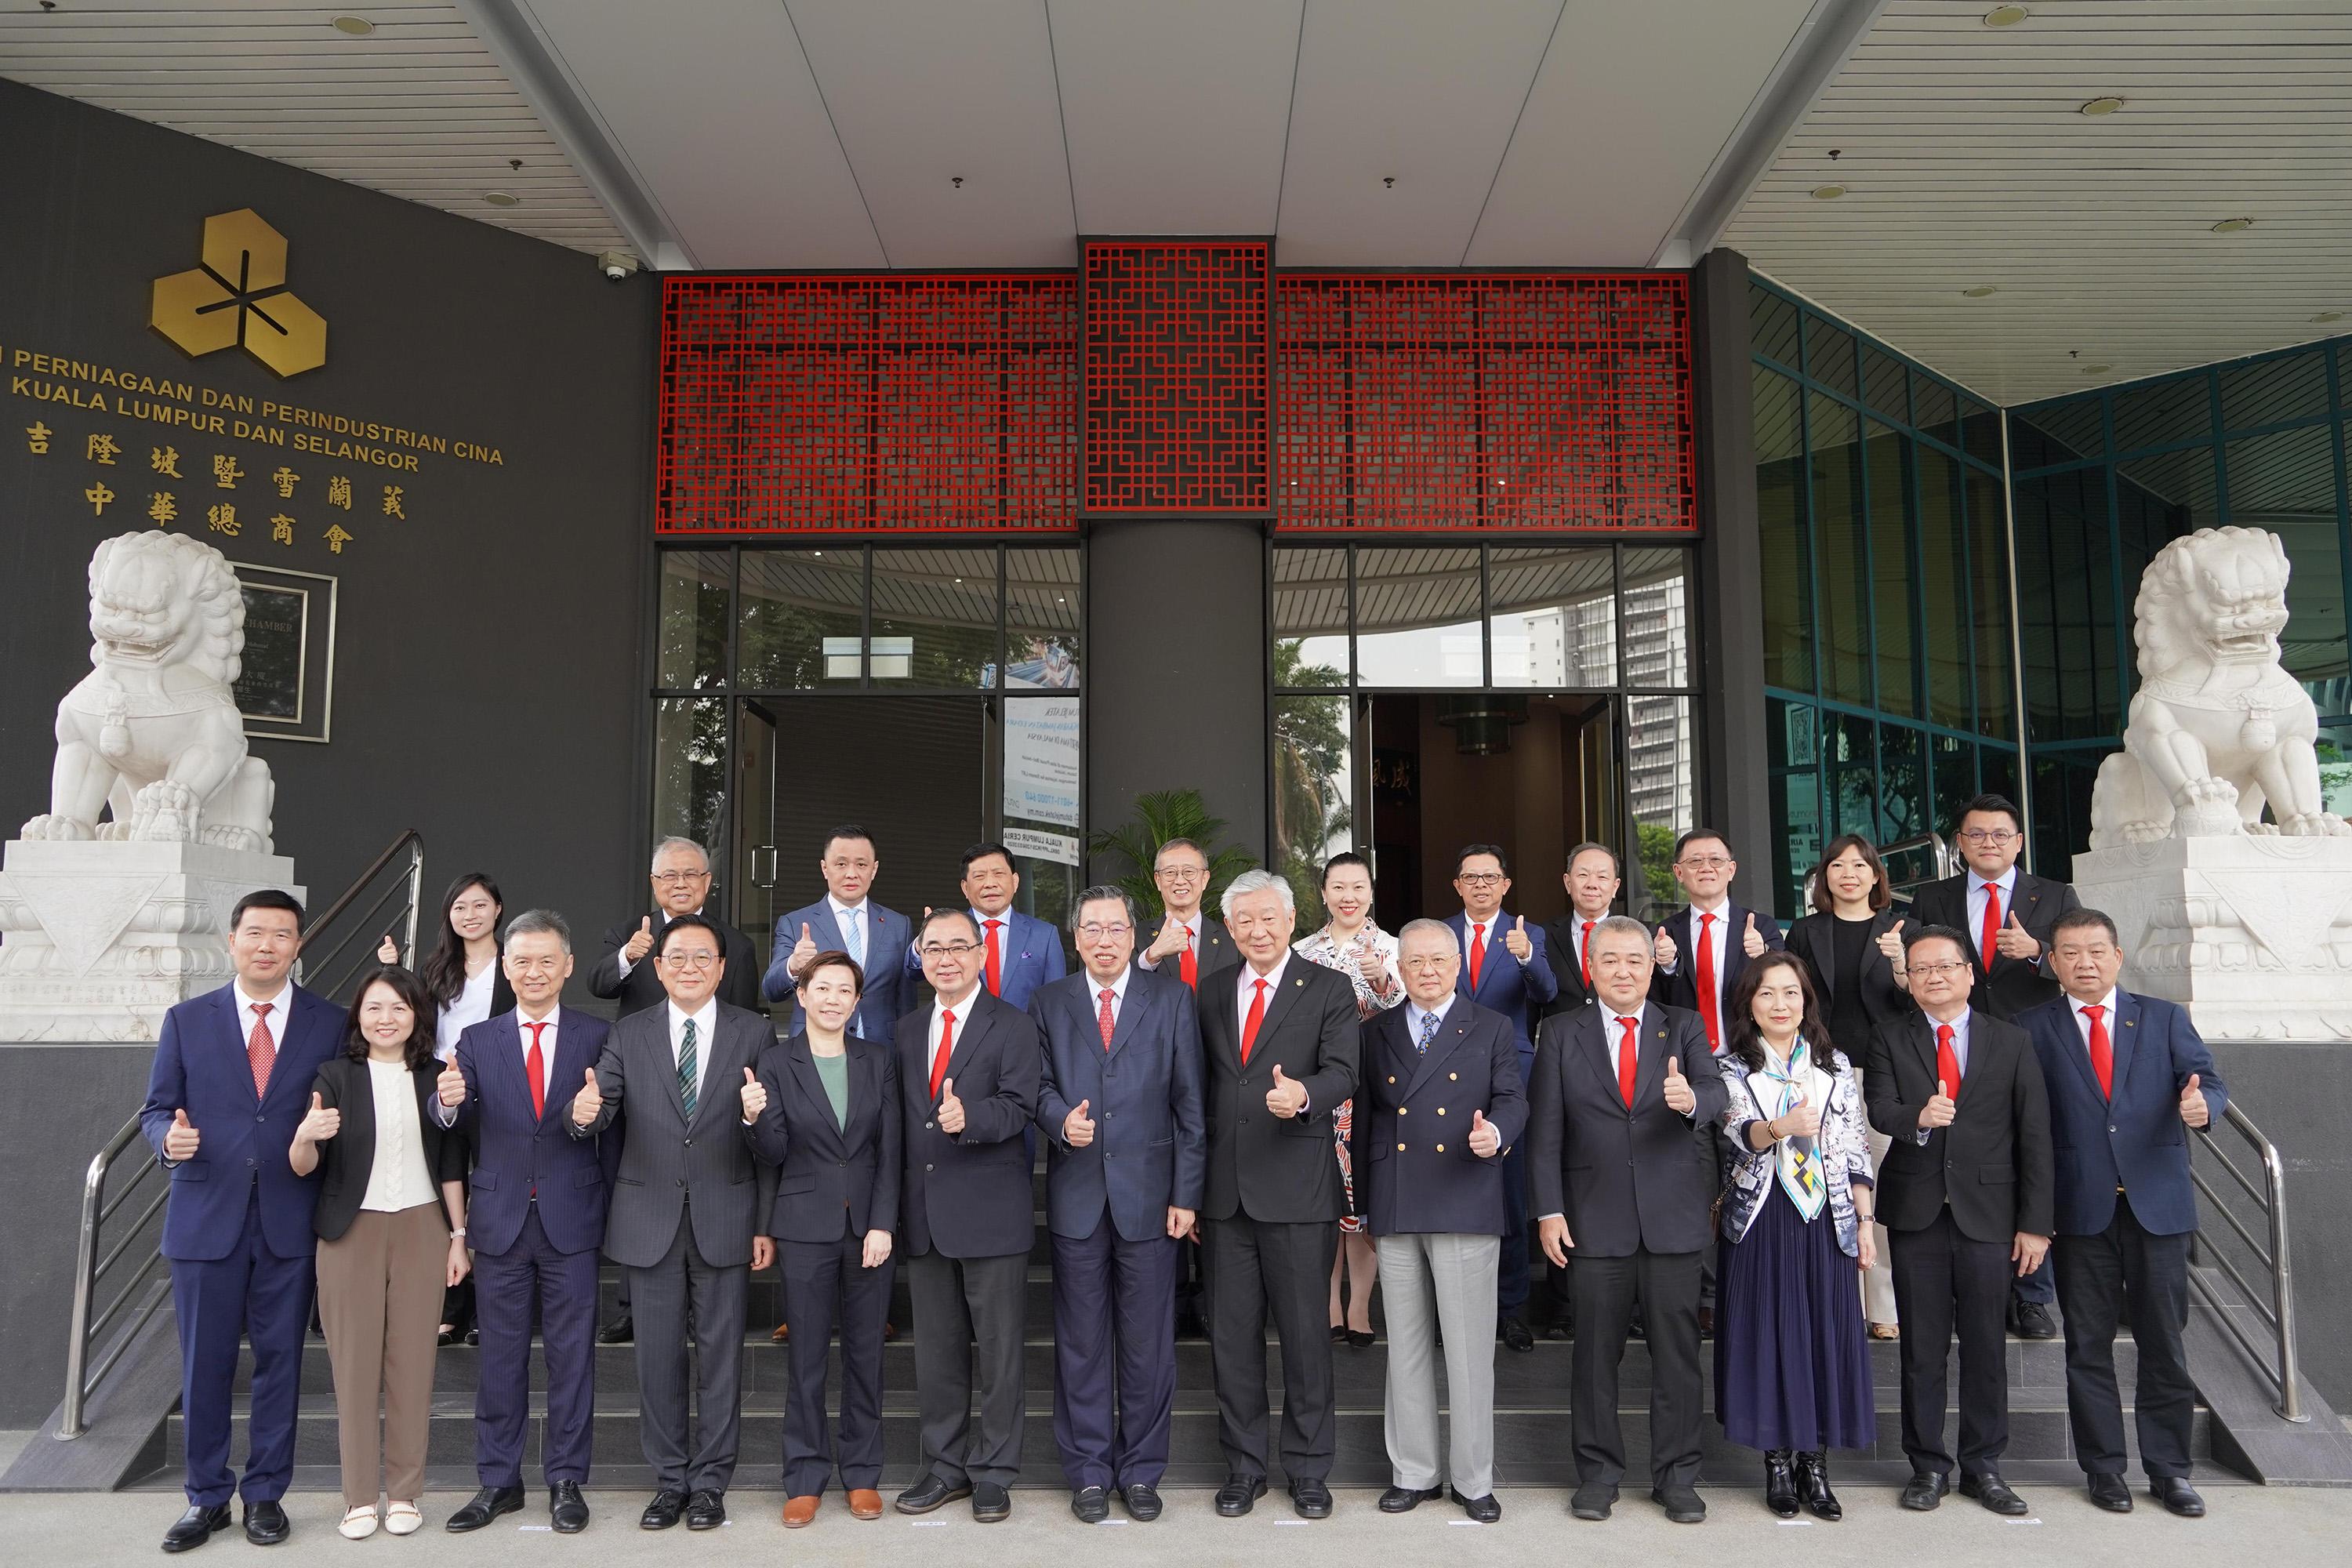 The Legislative Council (LegCo) delegation continued its duty visit in Kuala Lumpur, Malaysia today (May 14). Photo shows the LegCo President, Mr Andrew Leung (front row, seventh left), and members of the delegation meeting with the President of the Associated Chinese Chambers of Commerce and Industry of Malaysia, Mr Low Kian Chuan (front row, eighth left).